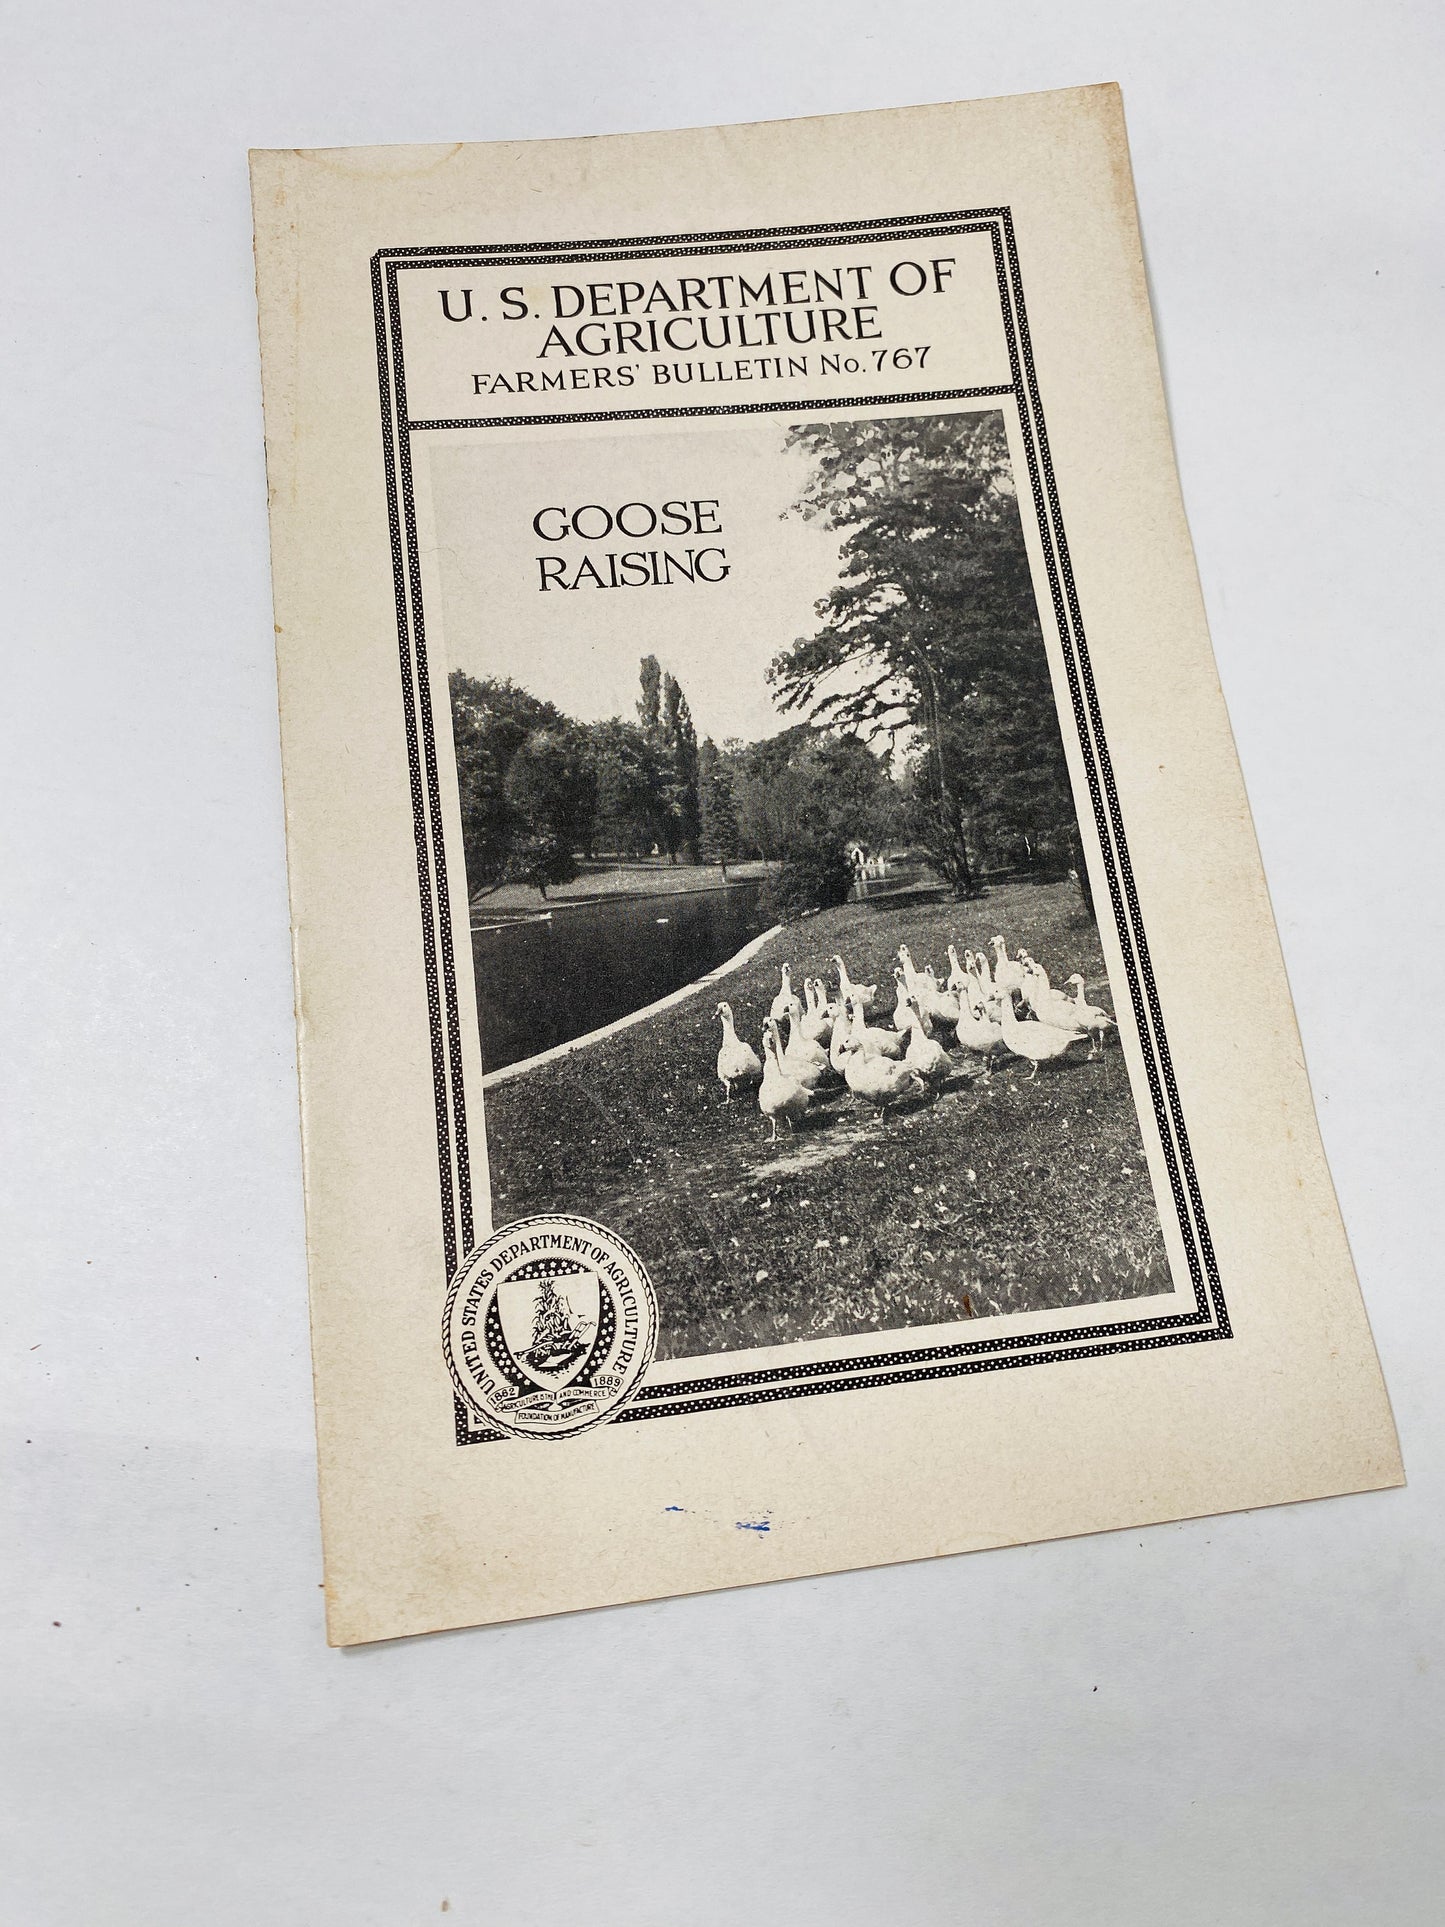 Vintage Agriculture Department farm booklets poultry goose raising hens dairy sheep circa 1930s Beautiful homesteading collectible